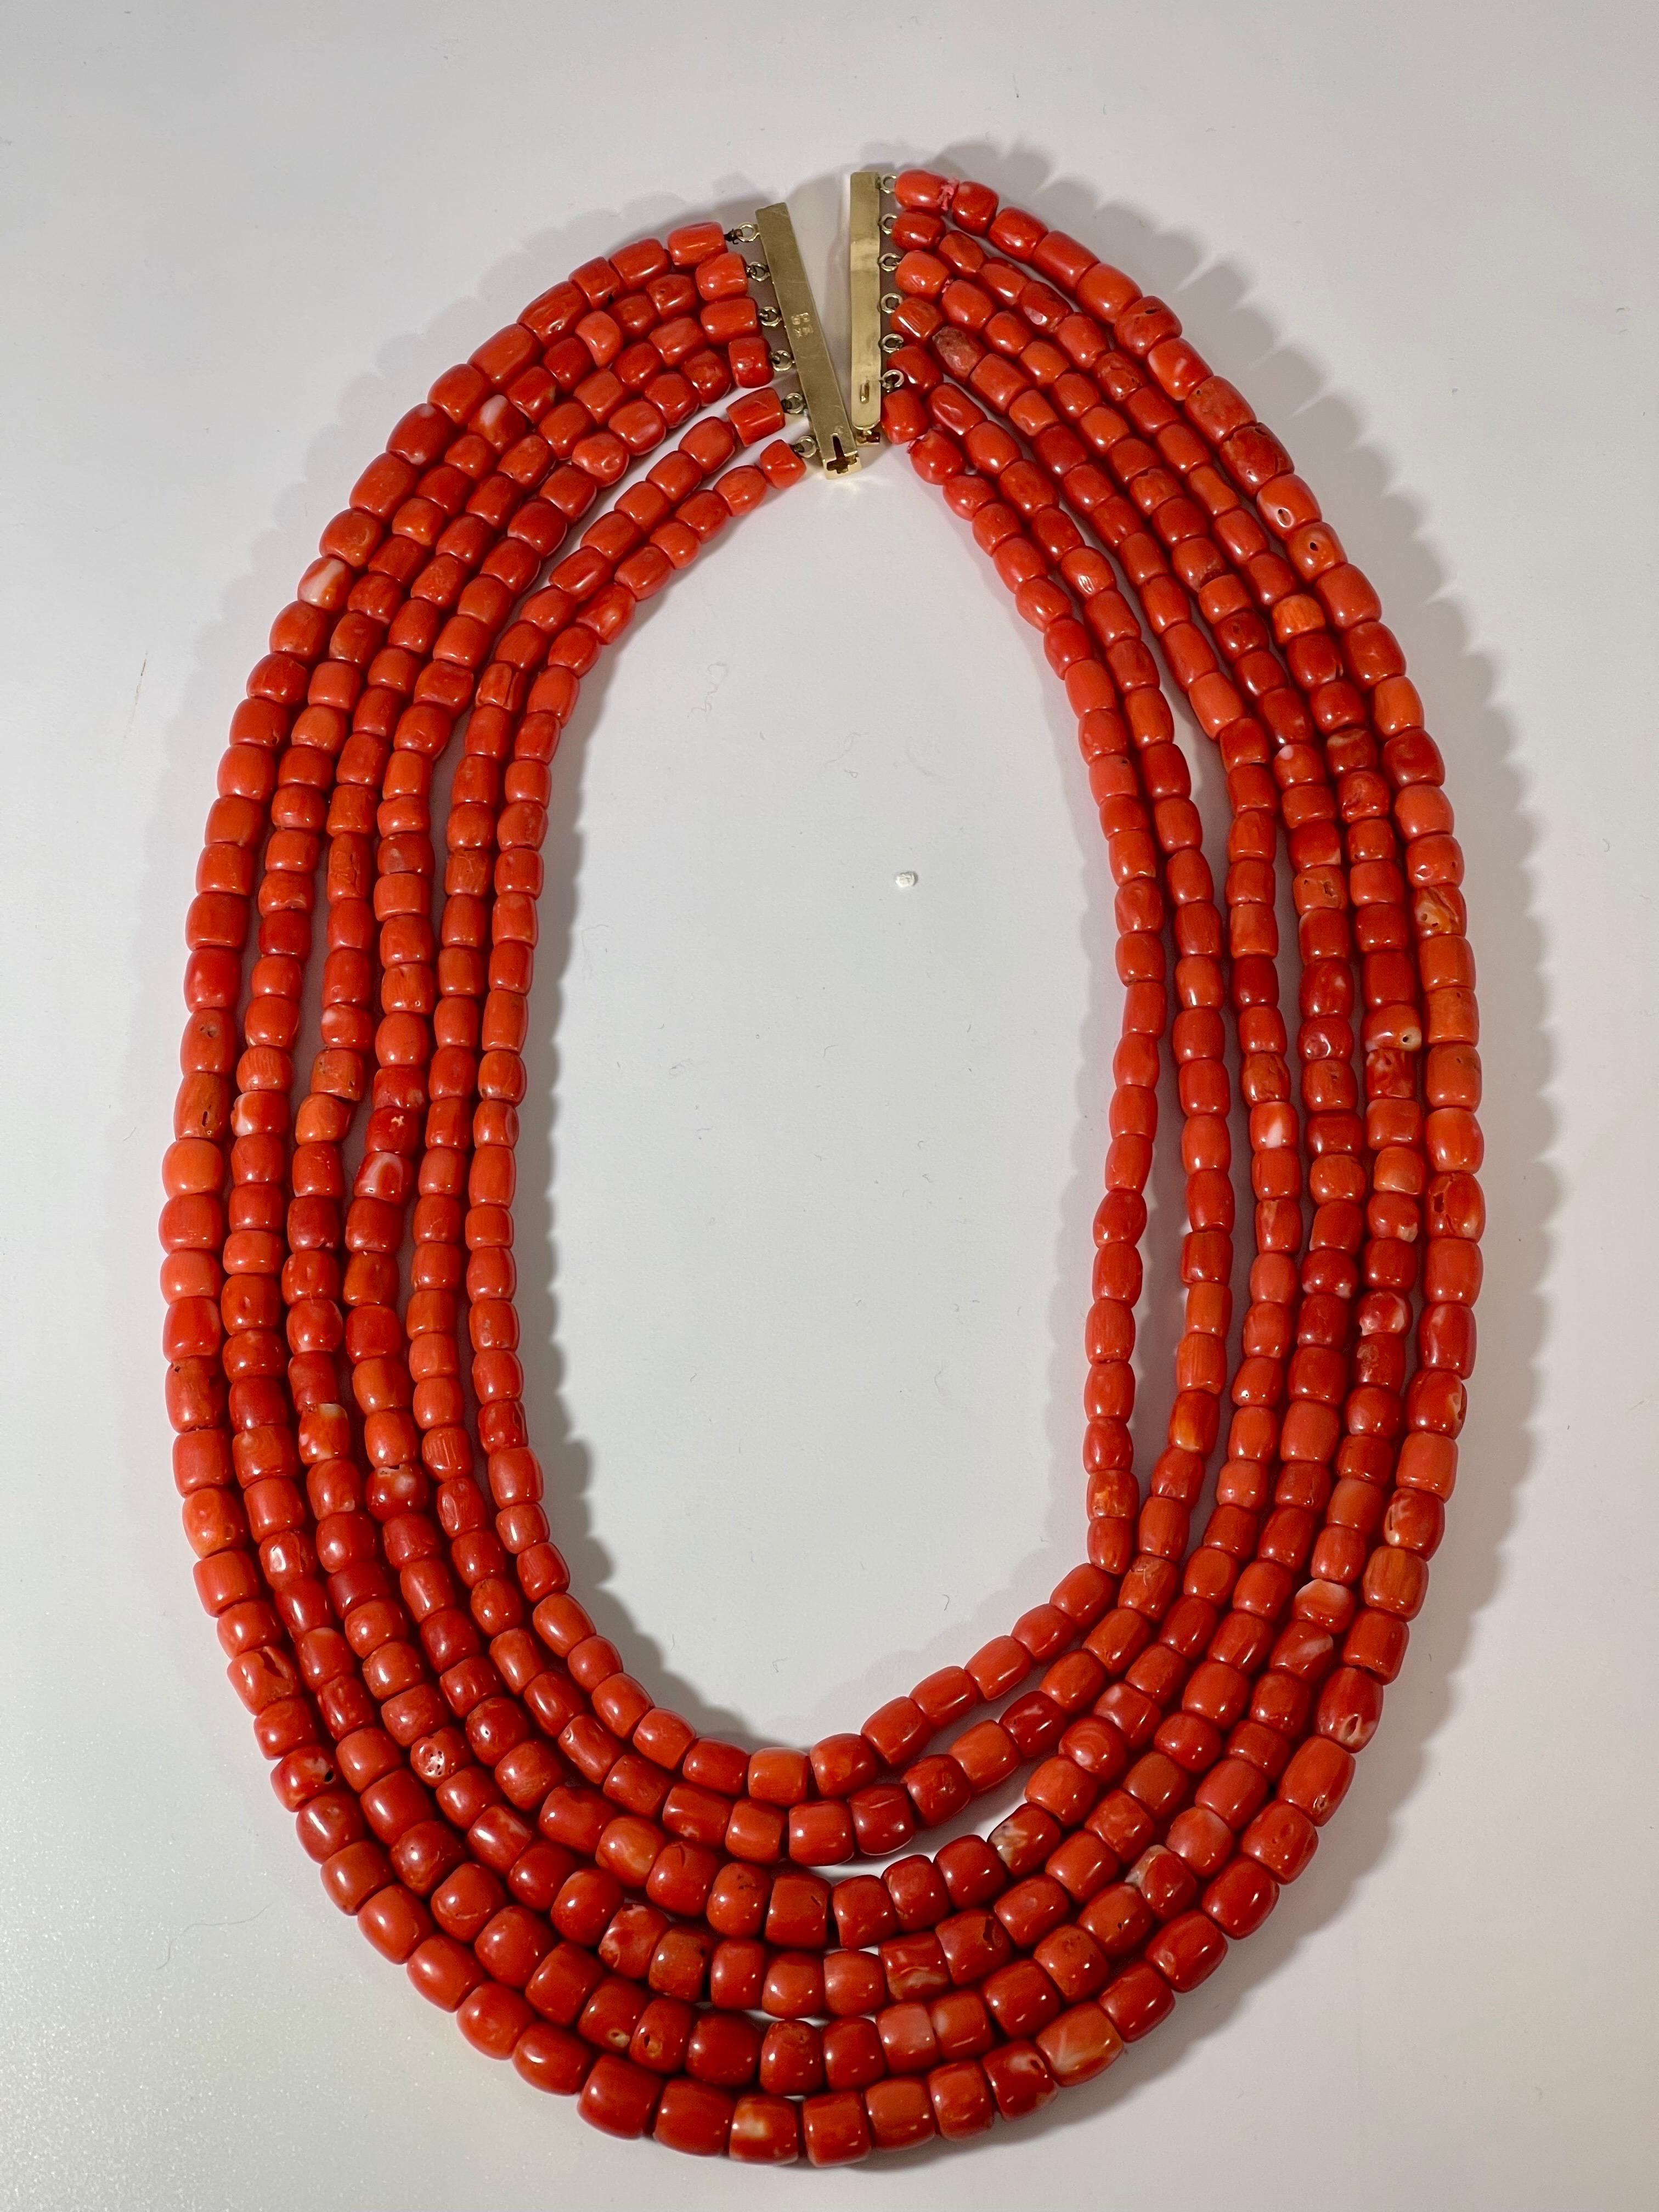 Vintage Natural Coral Multi Layer Bead Necklace 14 K Yellow  Estate.
A vintage piece.

6 layers of Natural Coral Beads
Very hard to find coral pieces now 
Gold: 14 carat Yellow  Gold 
Weight of the necklace 166  Grams
Stamped 14 K ,
Smallest layer